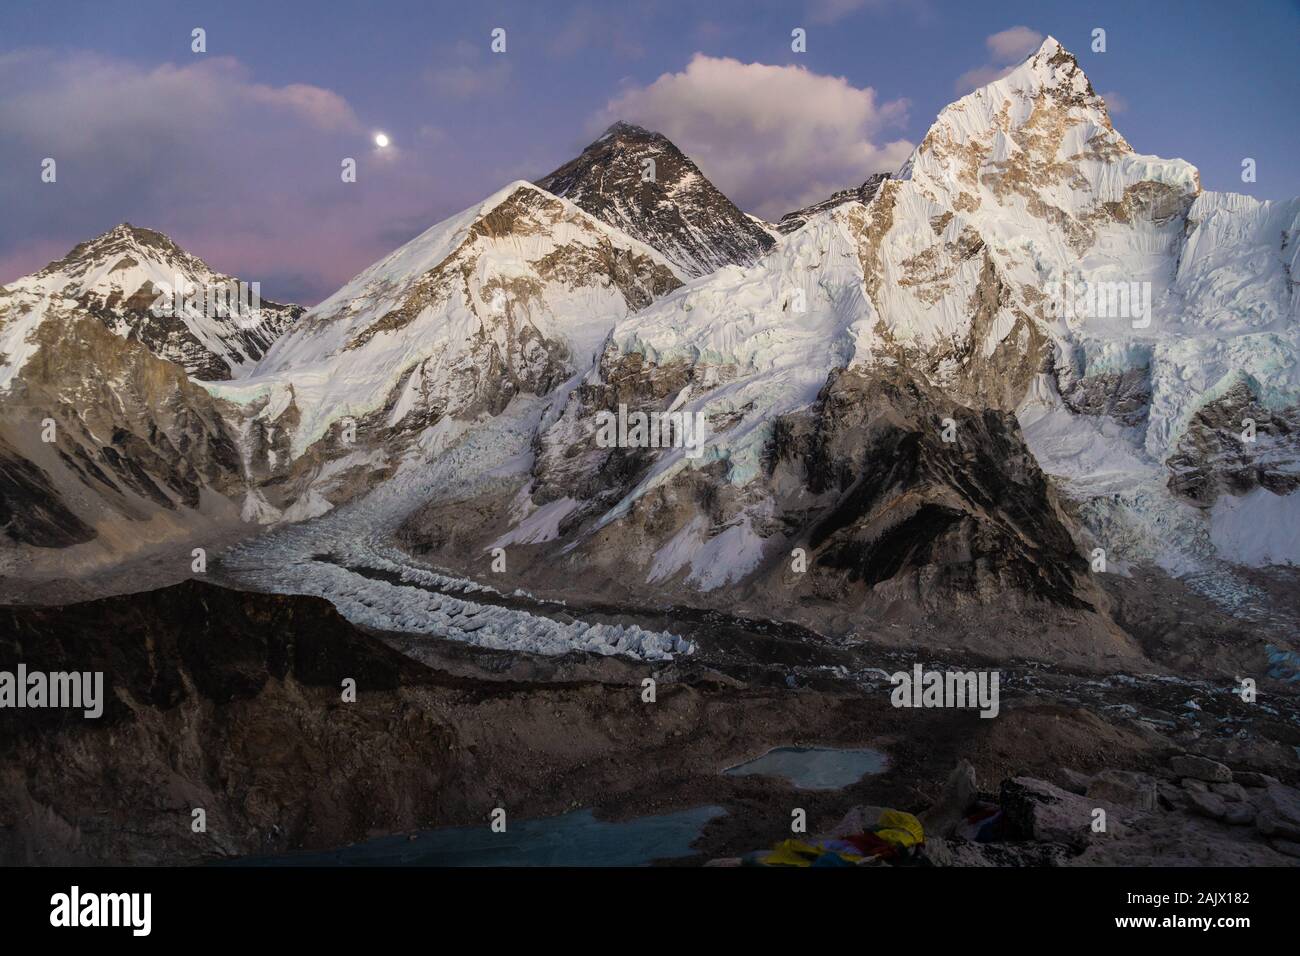 Twilight over the famous Mt Everest and Nuptse from the Kala Patthar at 5500m viewpoint in the Himalayas in Nepal Stock Photo